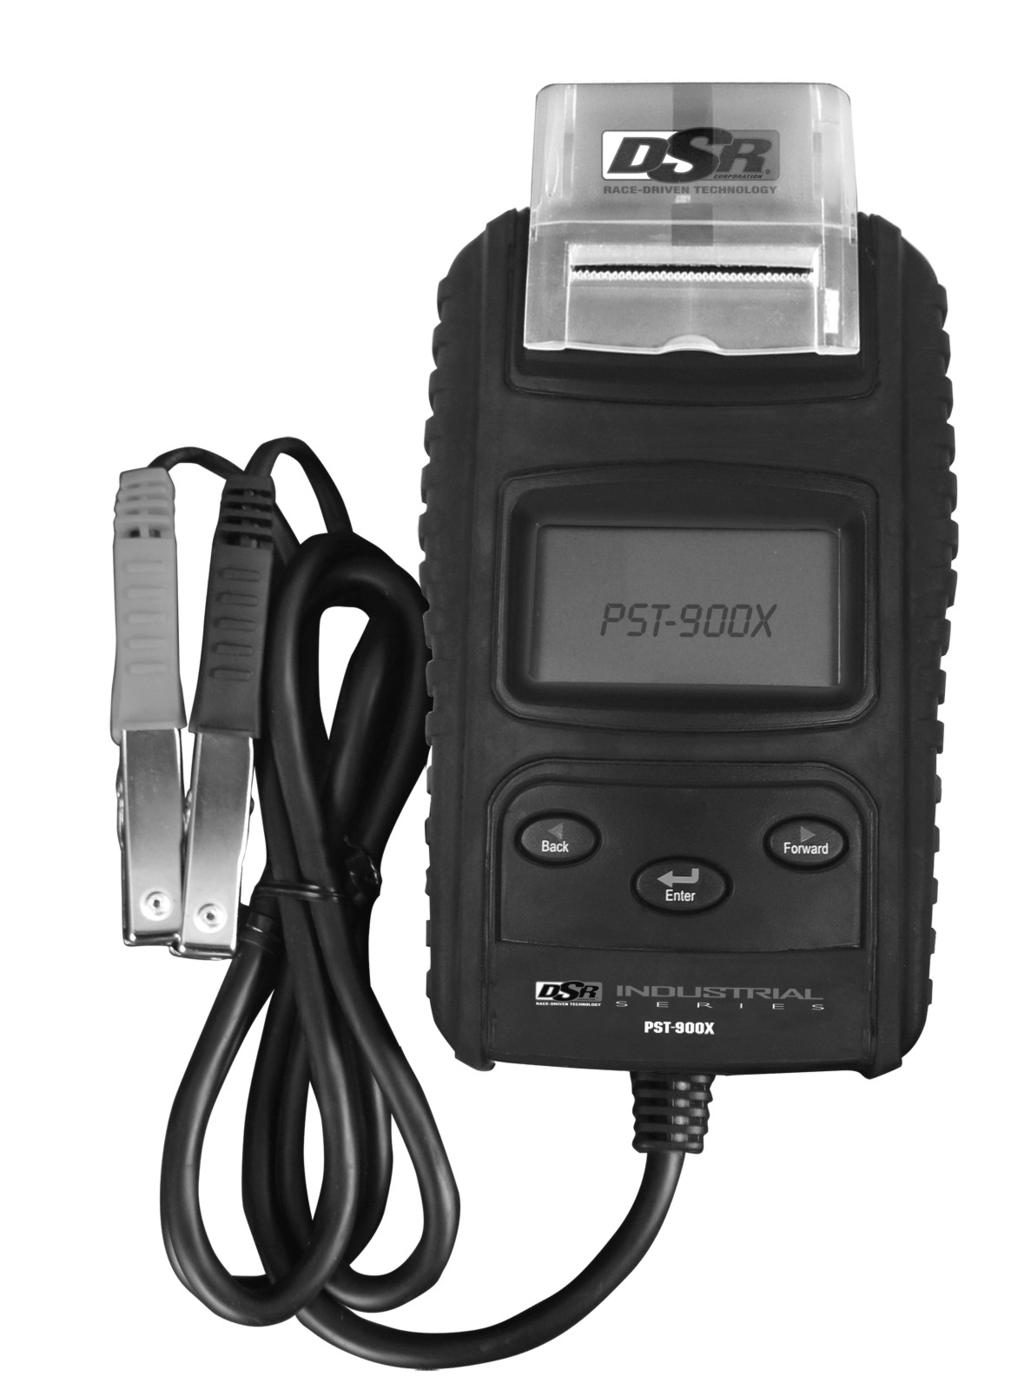 PST-900X PTI900X Battery Tester with Printer For 6 and 12 Volt